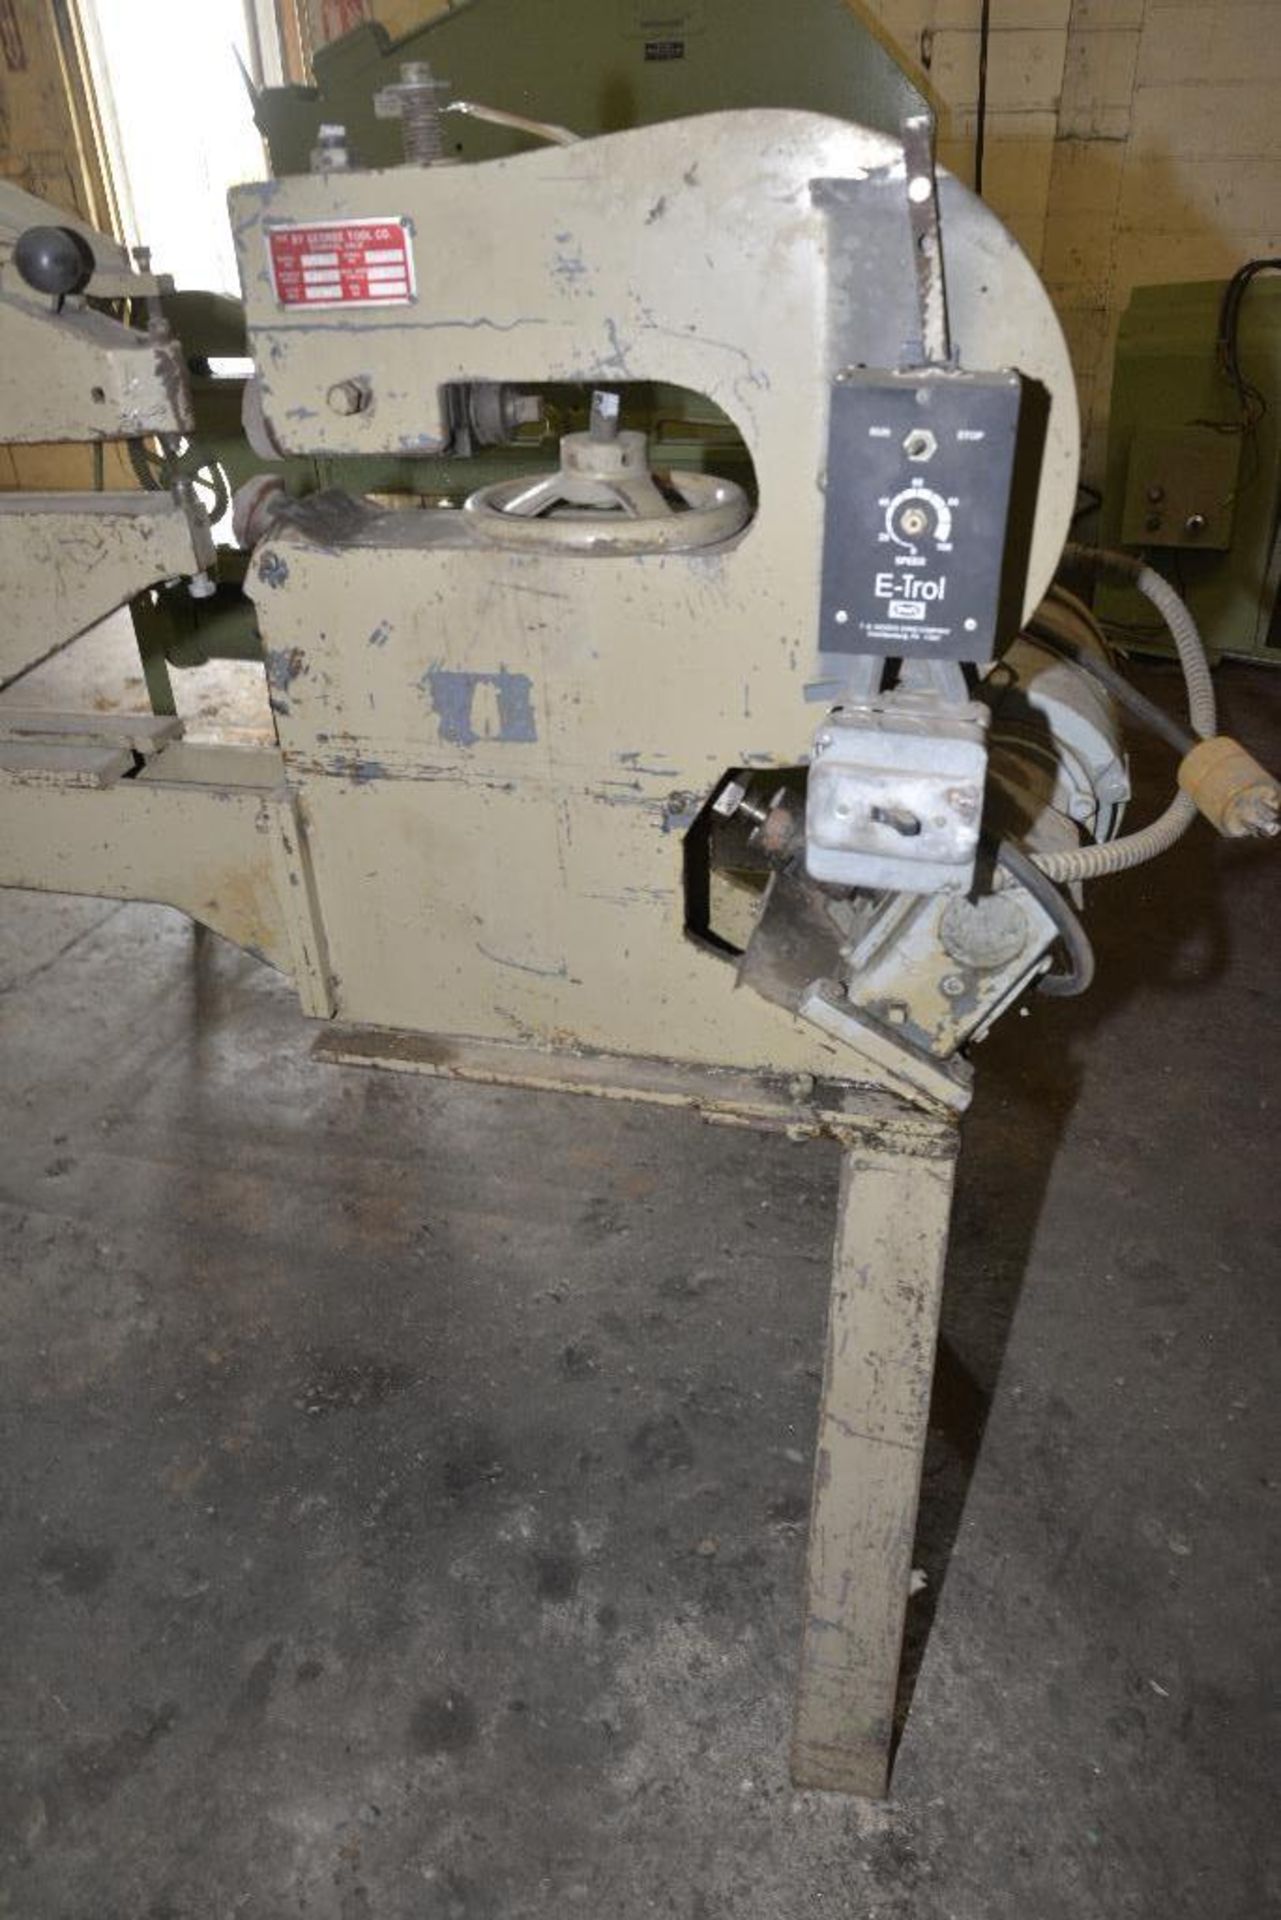 GEORGE TOOL CO. MD. CS5273 CIRCLE CUTTER S/N 027199 - SPINDLE SPEED 4-17 - MAXIUMN SIZE CIRCLE 52" - - Image 3 of 9